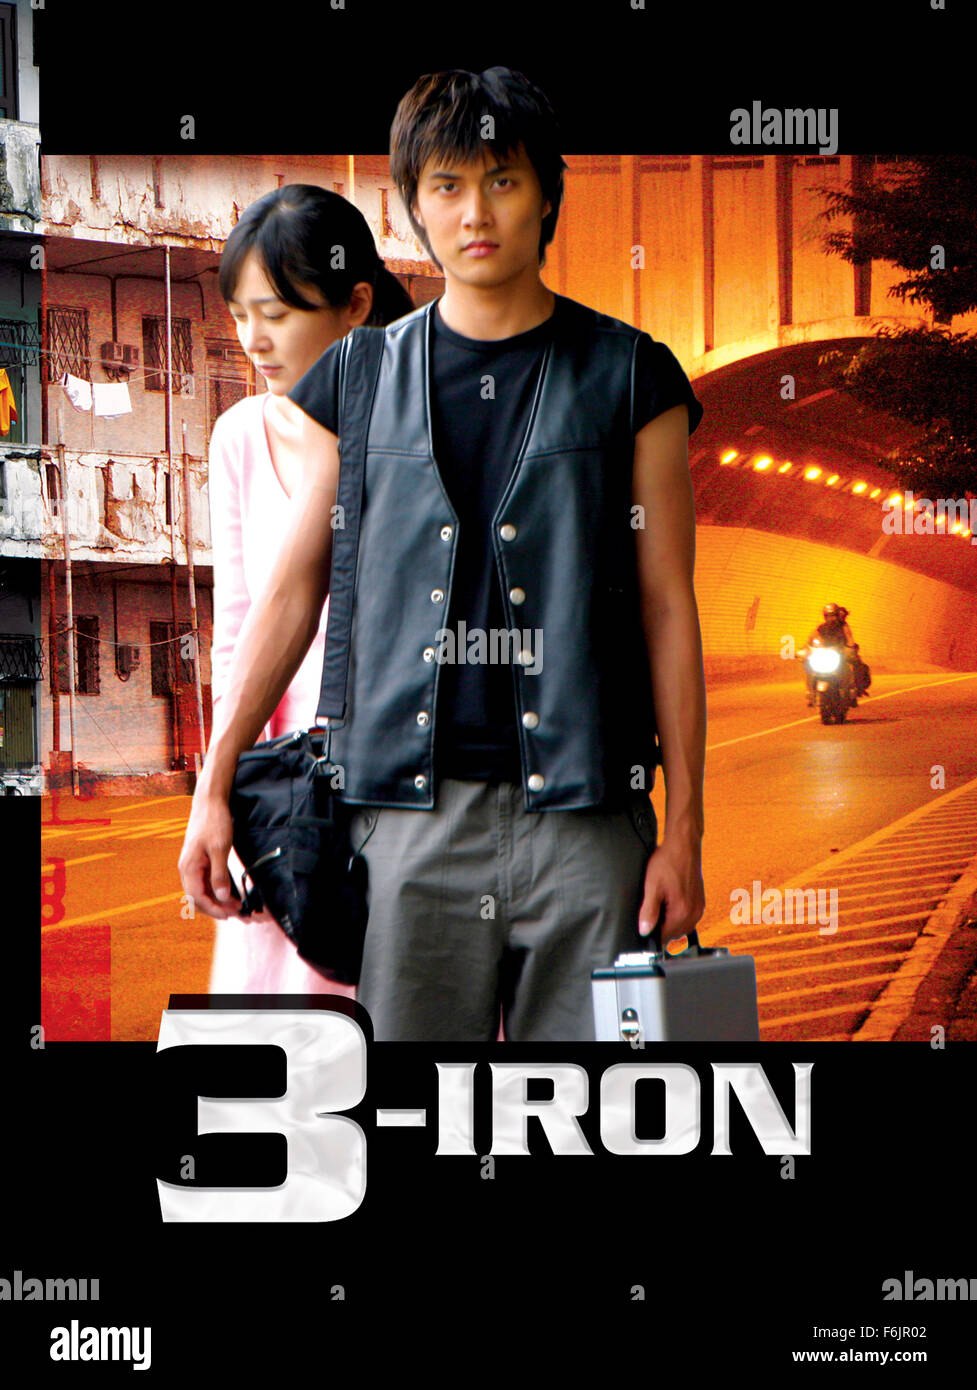 RELEASE DATE: April 29, 2005. MOVIE TITLE: 3-Iron. STUDIO: Cineclick Asia. PLOT: A young drifter enters strangers' houses - and lives - while owners are away. He spends a night or a day squatting in, repaying their unwitting hospitality by doing laundry or small repairs. His life changes when he runs into a beautiful woman in an affluent mansion who is ready to escape her unhappy, abusive marriage. PICTURED: SEUNG-YEON LEE as Sun-hwa and HEE JAE as Tae-suk. Stock Photo